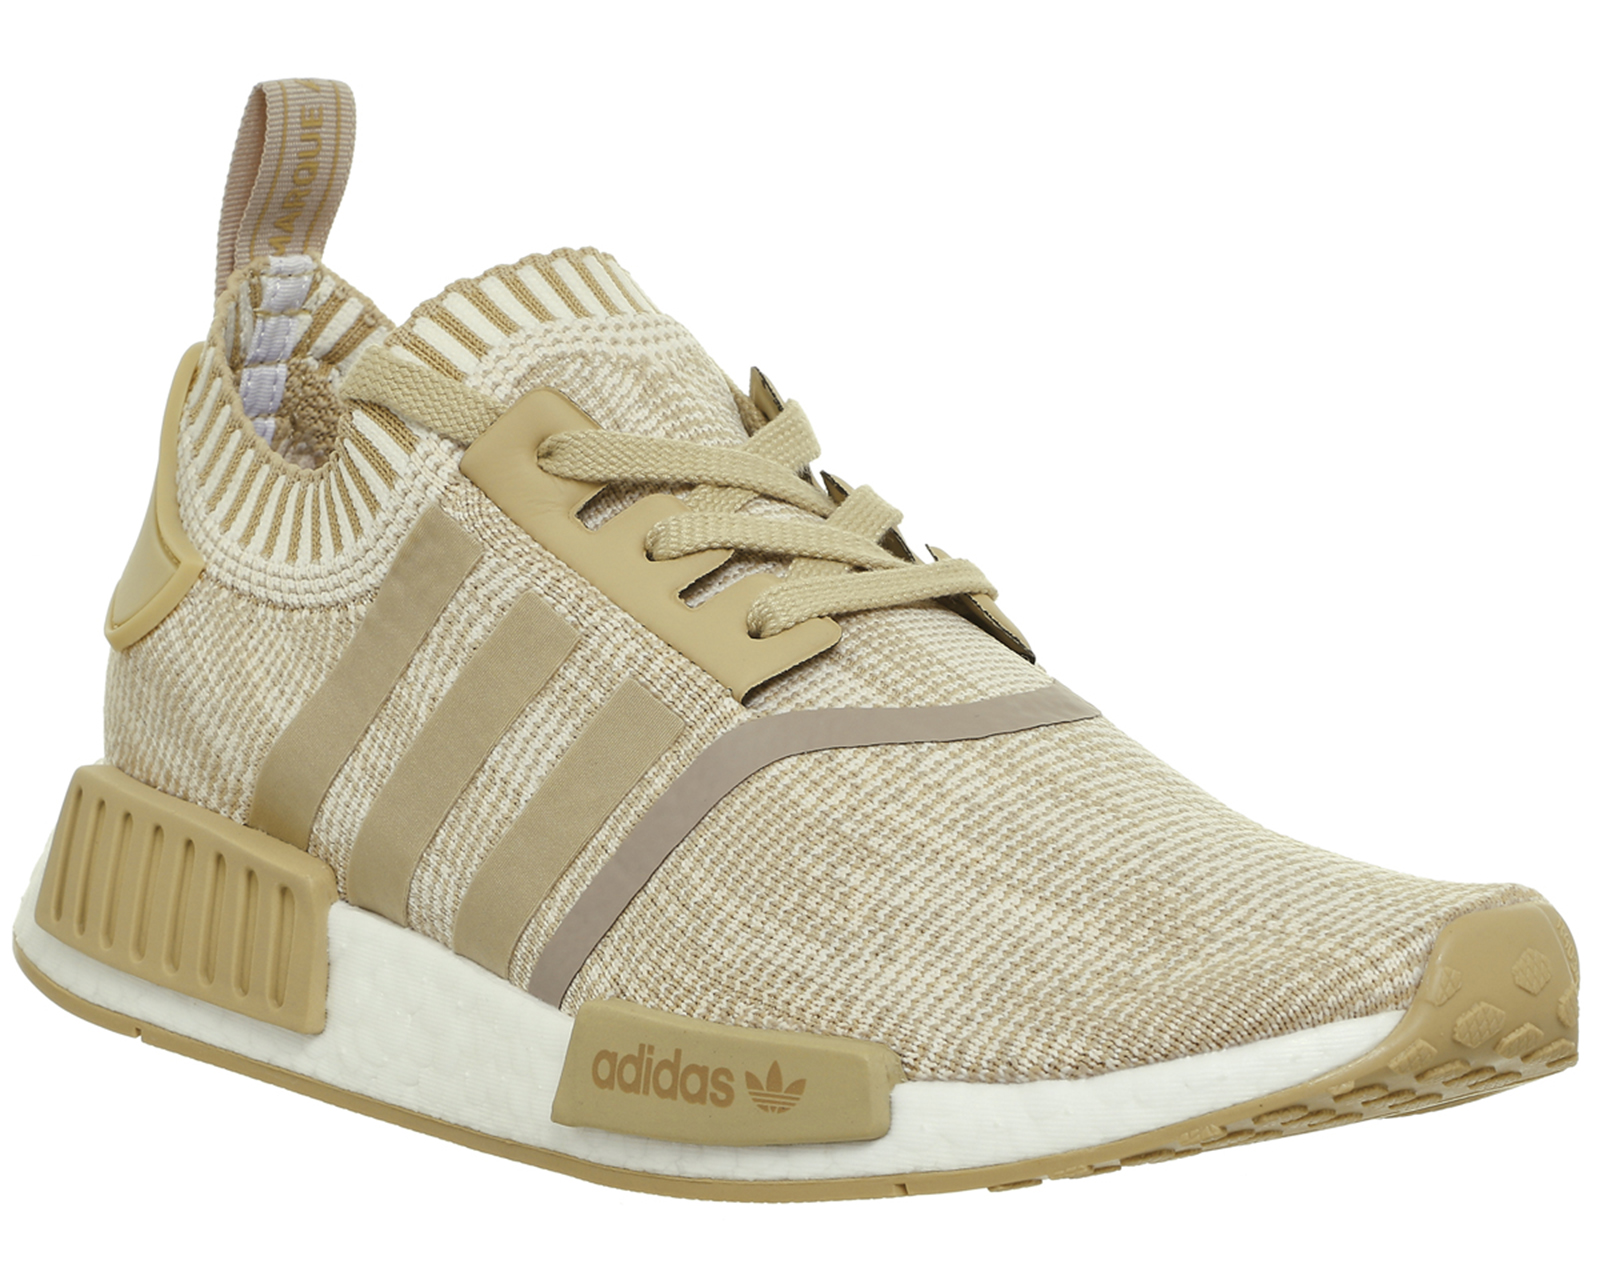 adidas Nmd R1 Prime Knit Linen Khaki Off White - His trainers